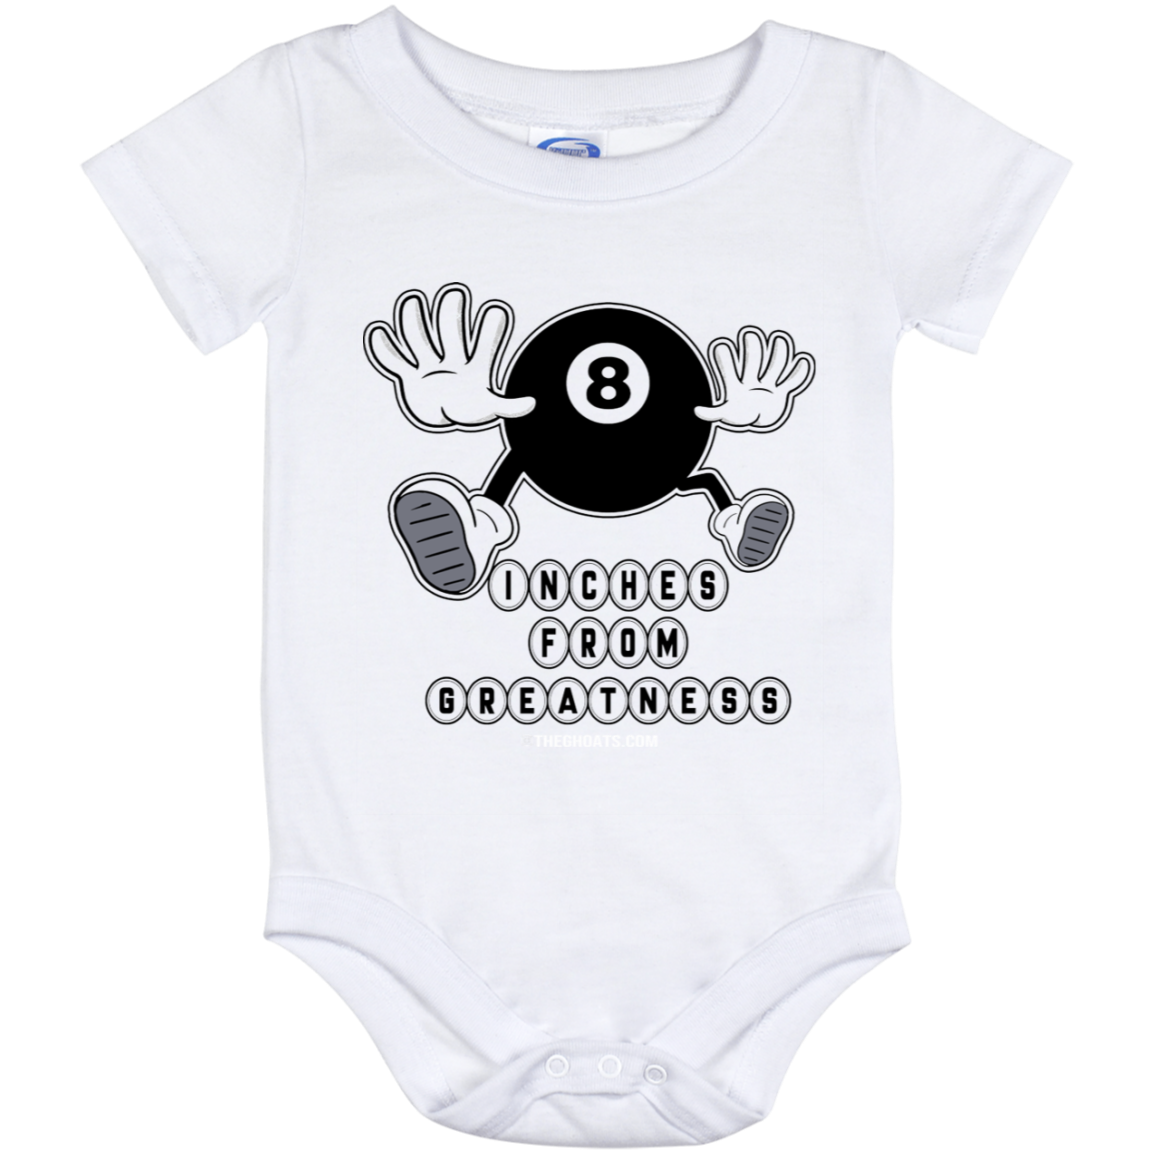 The GHOATS Custom Design #17. Inches From Greatness. Baby Onesie 12 Month